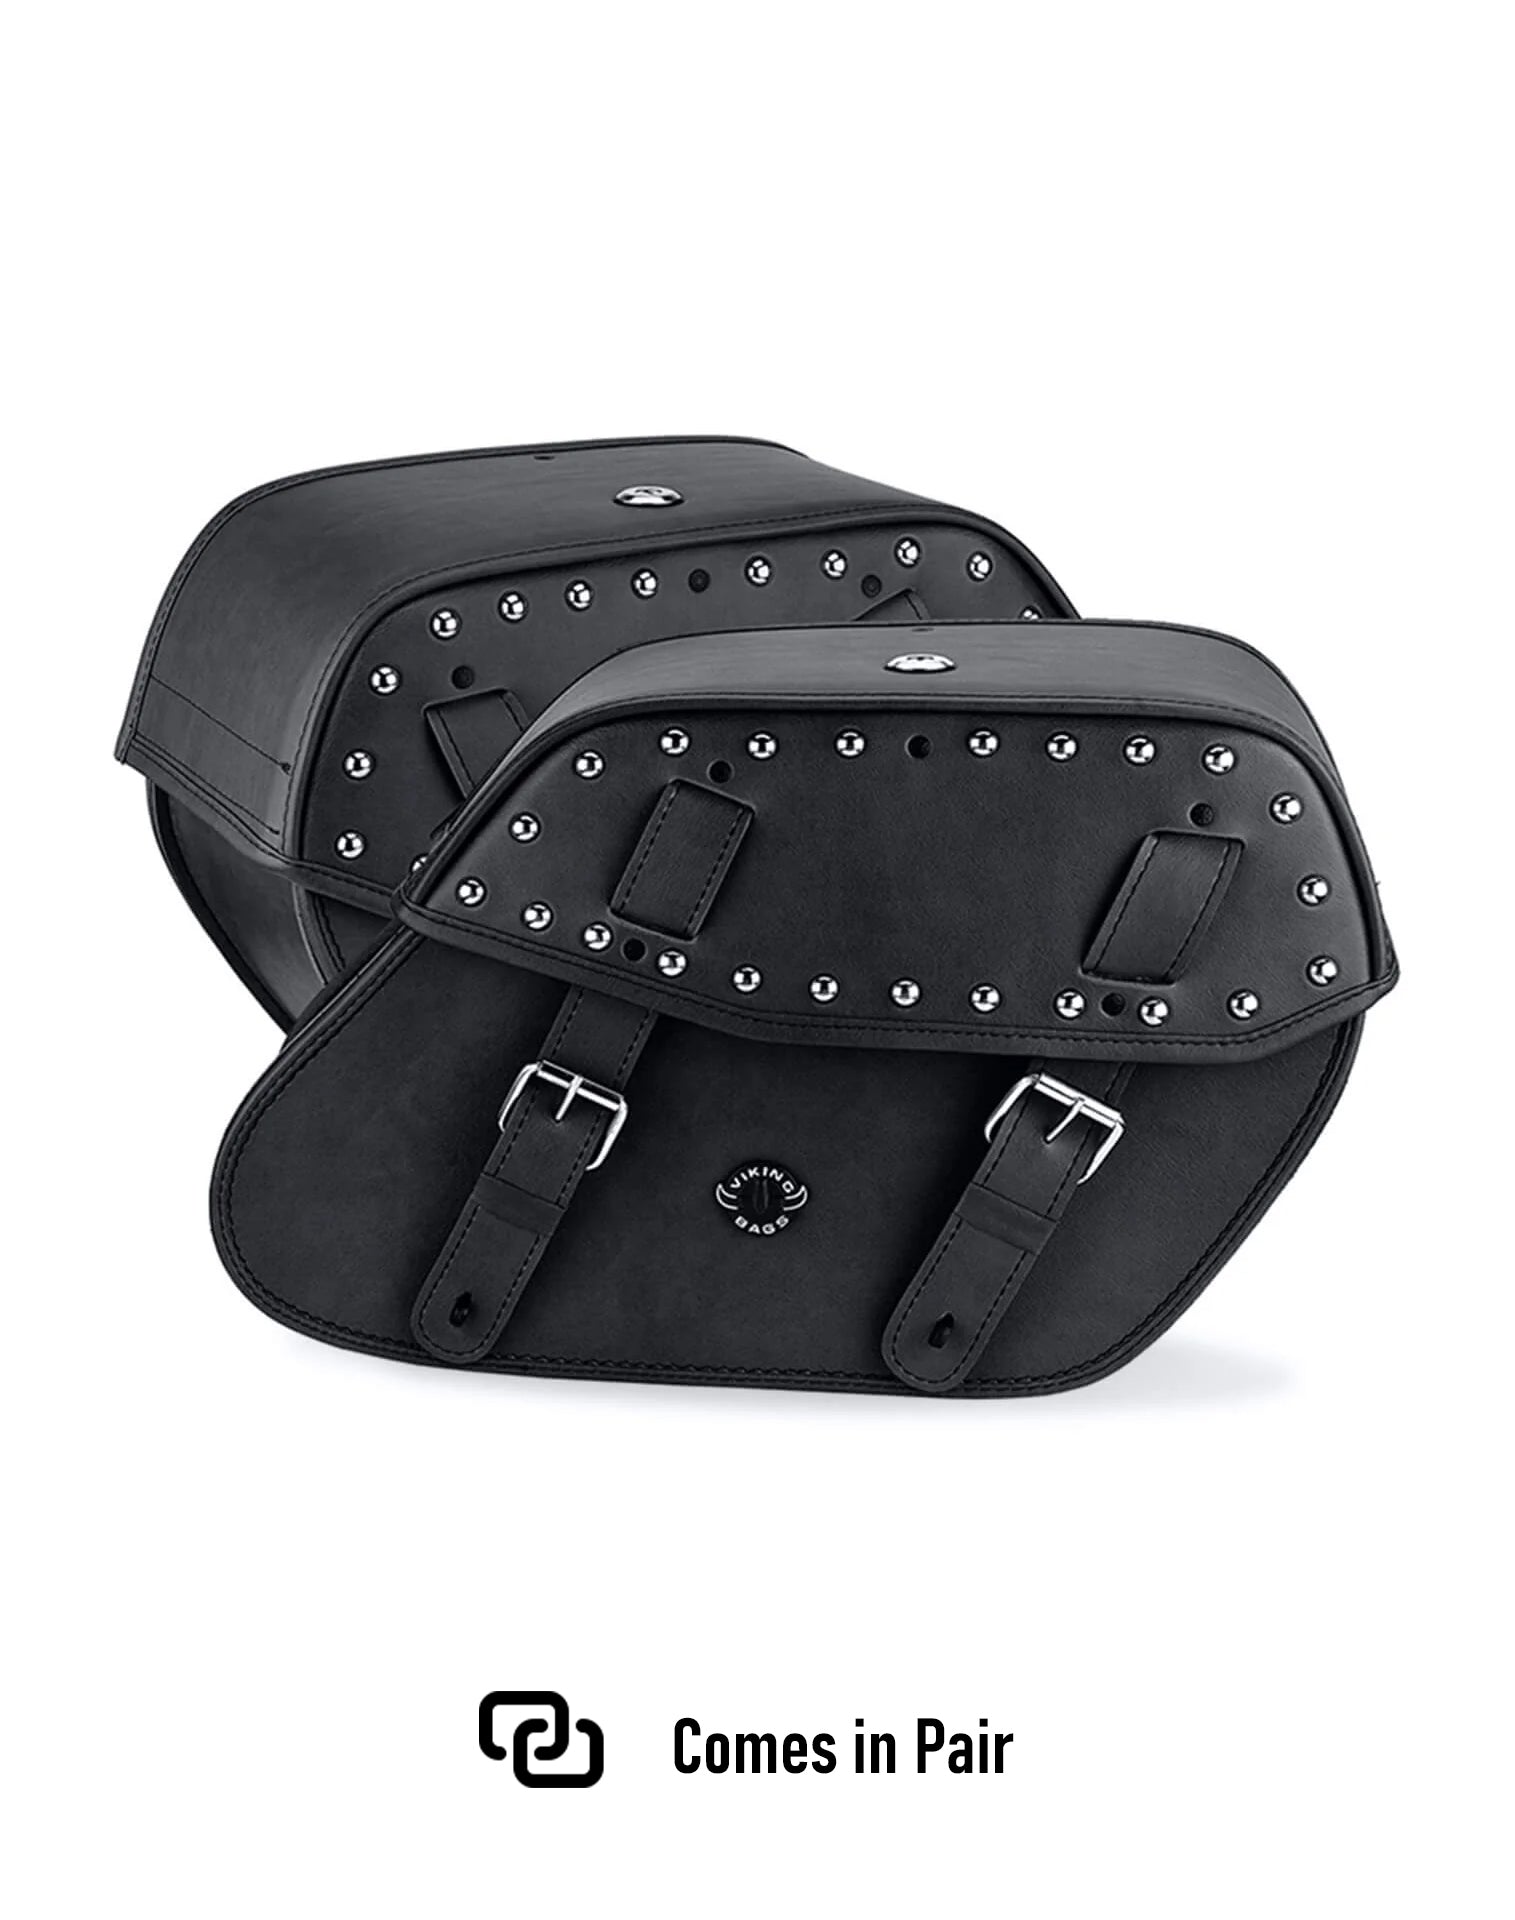 Viking Odin Large Kawasaki Vulcan 500 En500 Studded Leather Motorcycle Saddlebags Weather Resistant Bags Comes in Pair